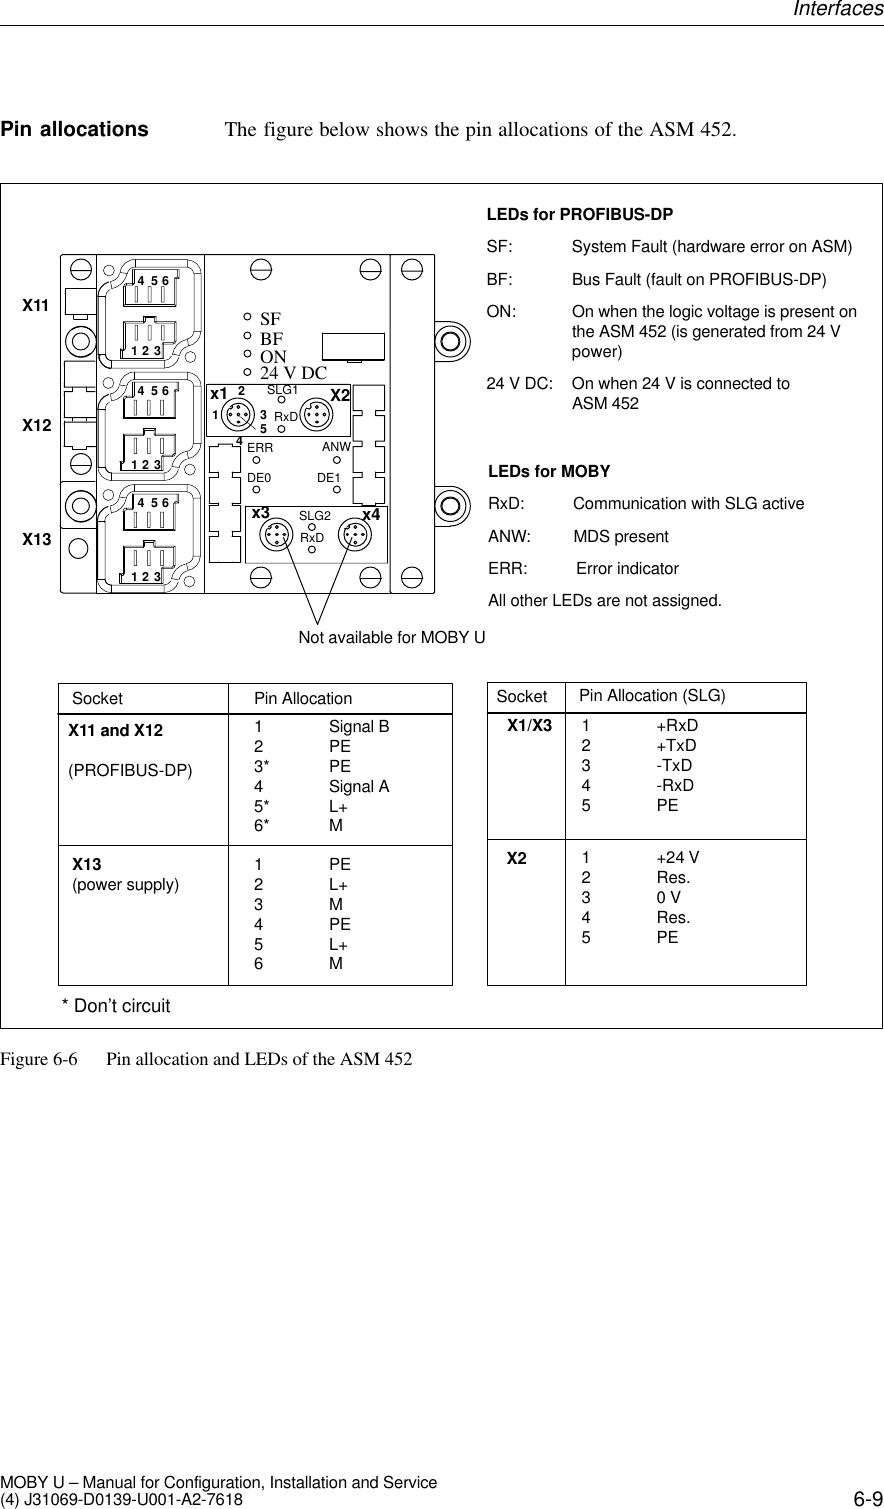 6-9MOBY U – Manual for Configuration, Installation and Service(4) J31069-D0139-U001-A2-7618The figure below shows the pin allocations of the ASM 452.1 +RxD2 +TxD3 -TxD4 -RxD5PE1 +24 V2 Res.30 V4 Res.5PE12345654321x1 X2x3 x4654654321321X11X12X13SocketX11 and X12 (PROFIBUS-DP)Pin Allocation1 Signal B2PE3* PE4 Signal A5* L+6* MX13(power supply) 1PE2L+3M4PE5L+6MSFBFON24 V DCLEDs for MOBYRxD: Communication with SLG activeANW: MDS presentERR: Error indicatorAll other LEDs are not assigned.LEDs for PROFIBUS-DPSF: System Fault (hardware error on ASM)BF: Bus Fault (fault on PROFIBUS-DP)ON: On when the logic voltage is present on  the ASM 452 (is generated from 24 V power)24 V DC: On when 24 V is connected to ASM 452* Don’t circuitPin Allocation (SLG)SocketX1/X3RxDERR ANWDE0 DE1SLG2RxDX2SLG1Not available for MOBY UFigure 6-6 Pin allocation and LEDs of the ASM 452Pin allocationsInterfaces